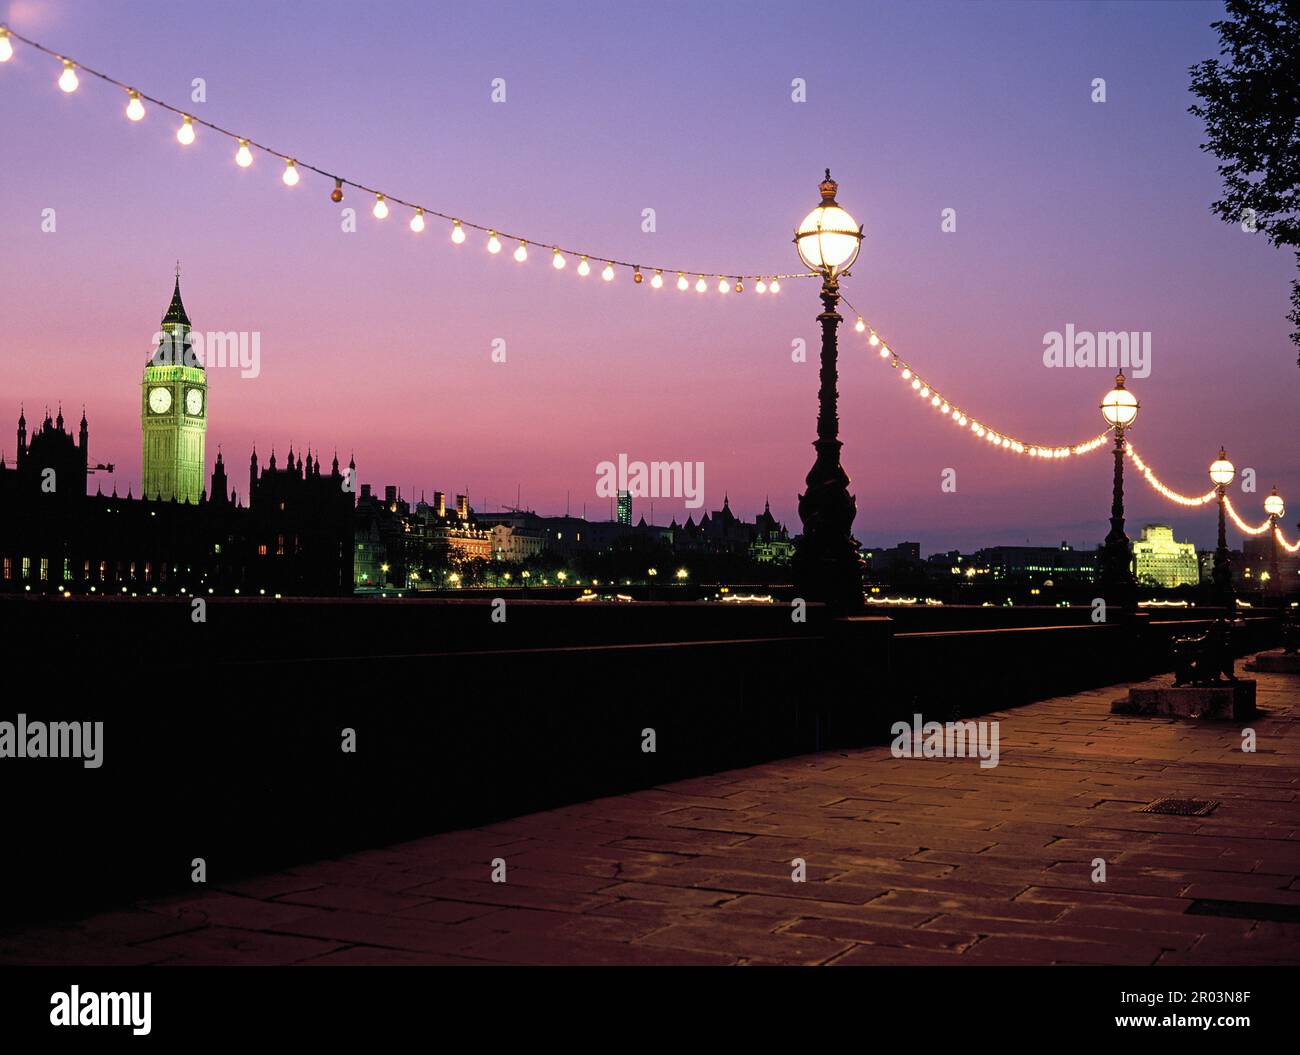 England. London. Thames Embankment street lamps at night with Big Ben in the background. Stock Photo